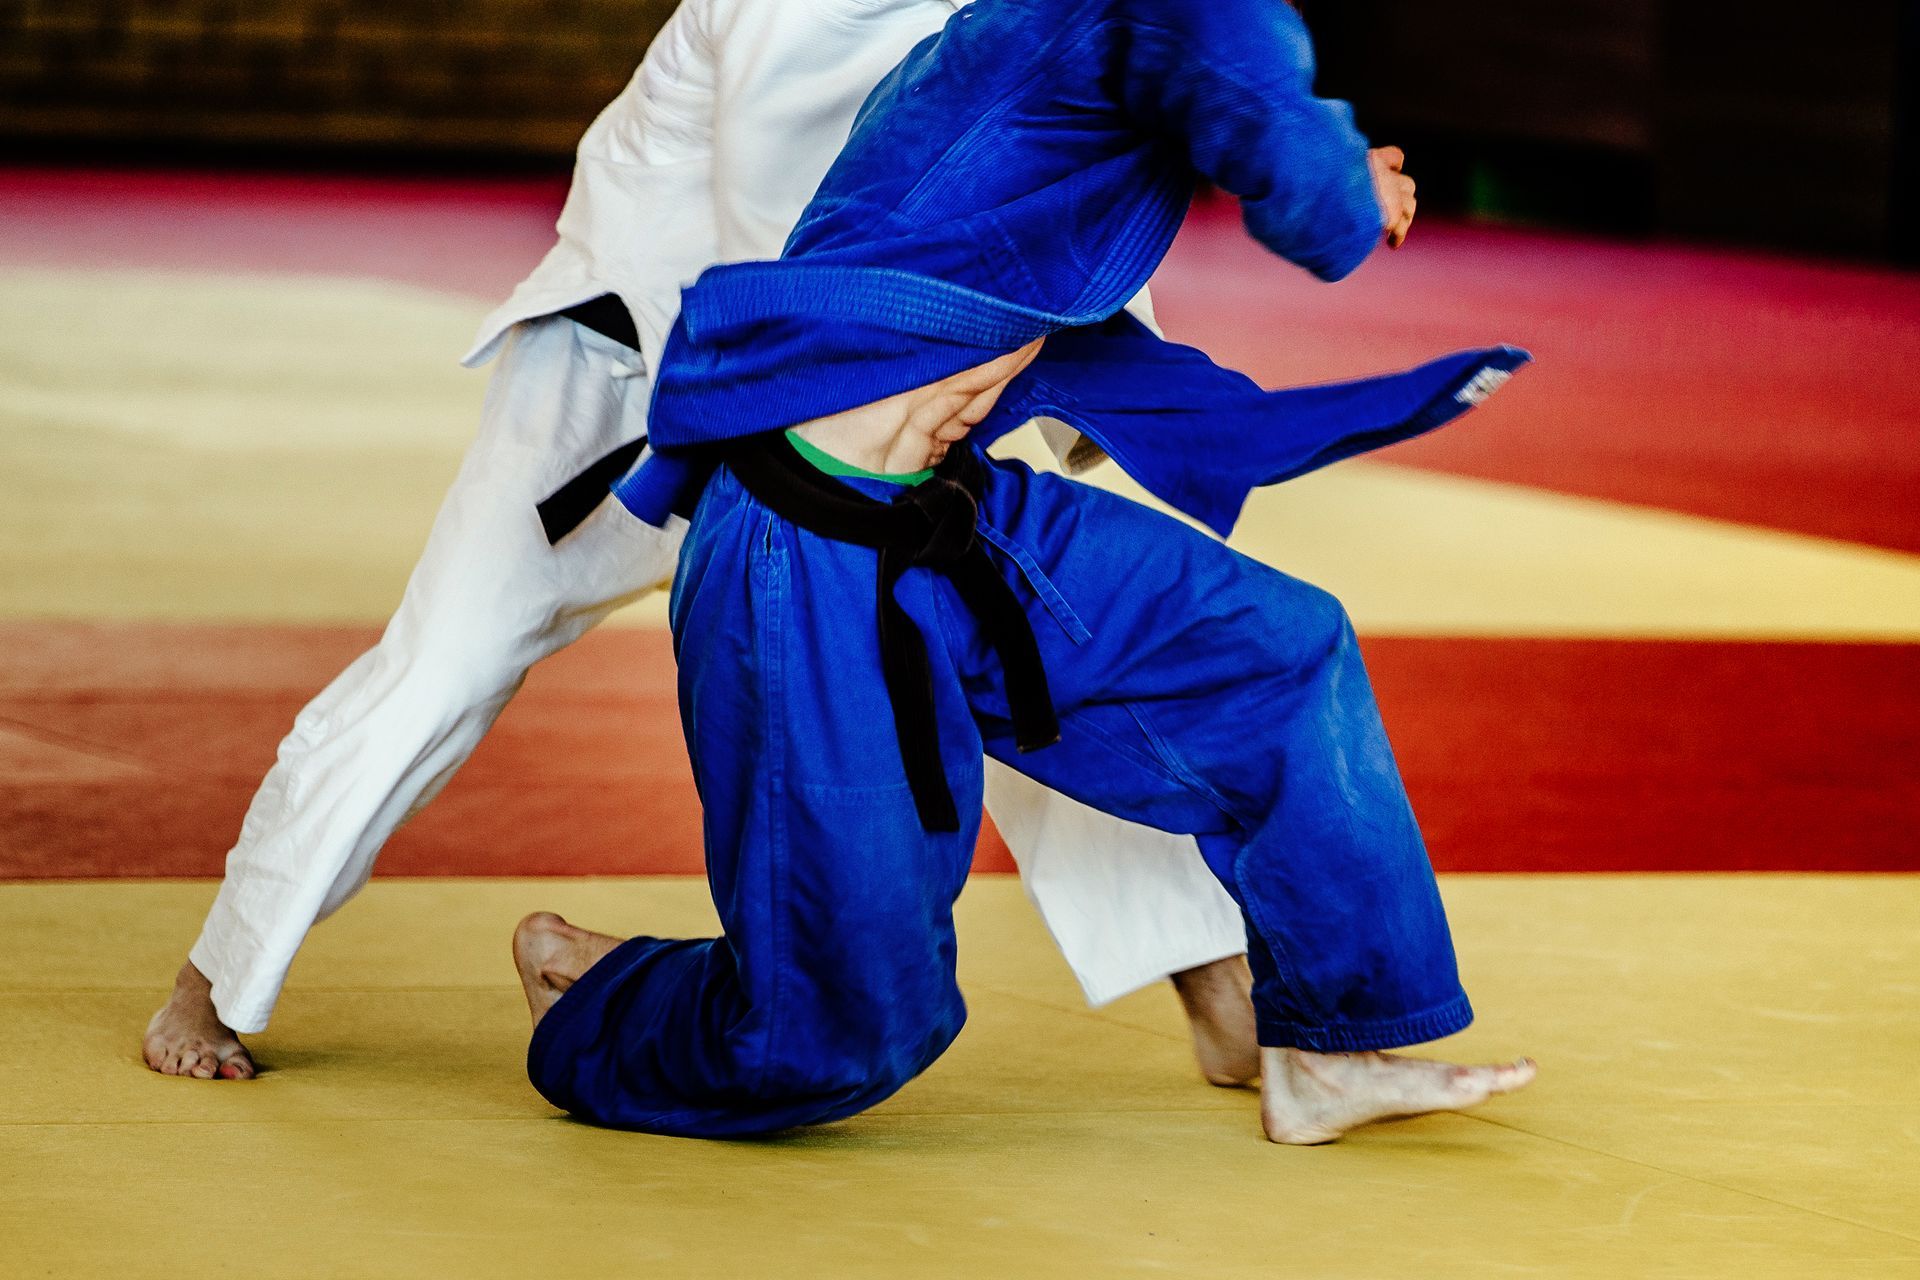 Two men are fighting in a judo match on a mat.